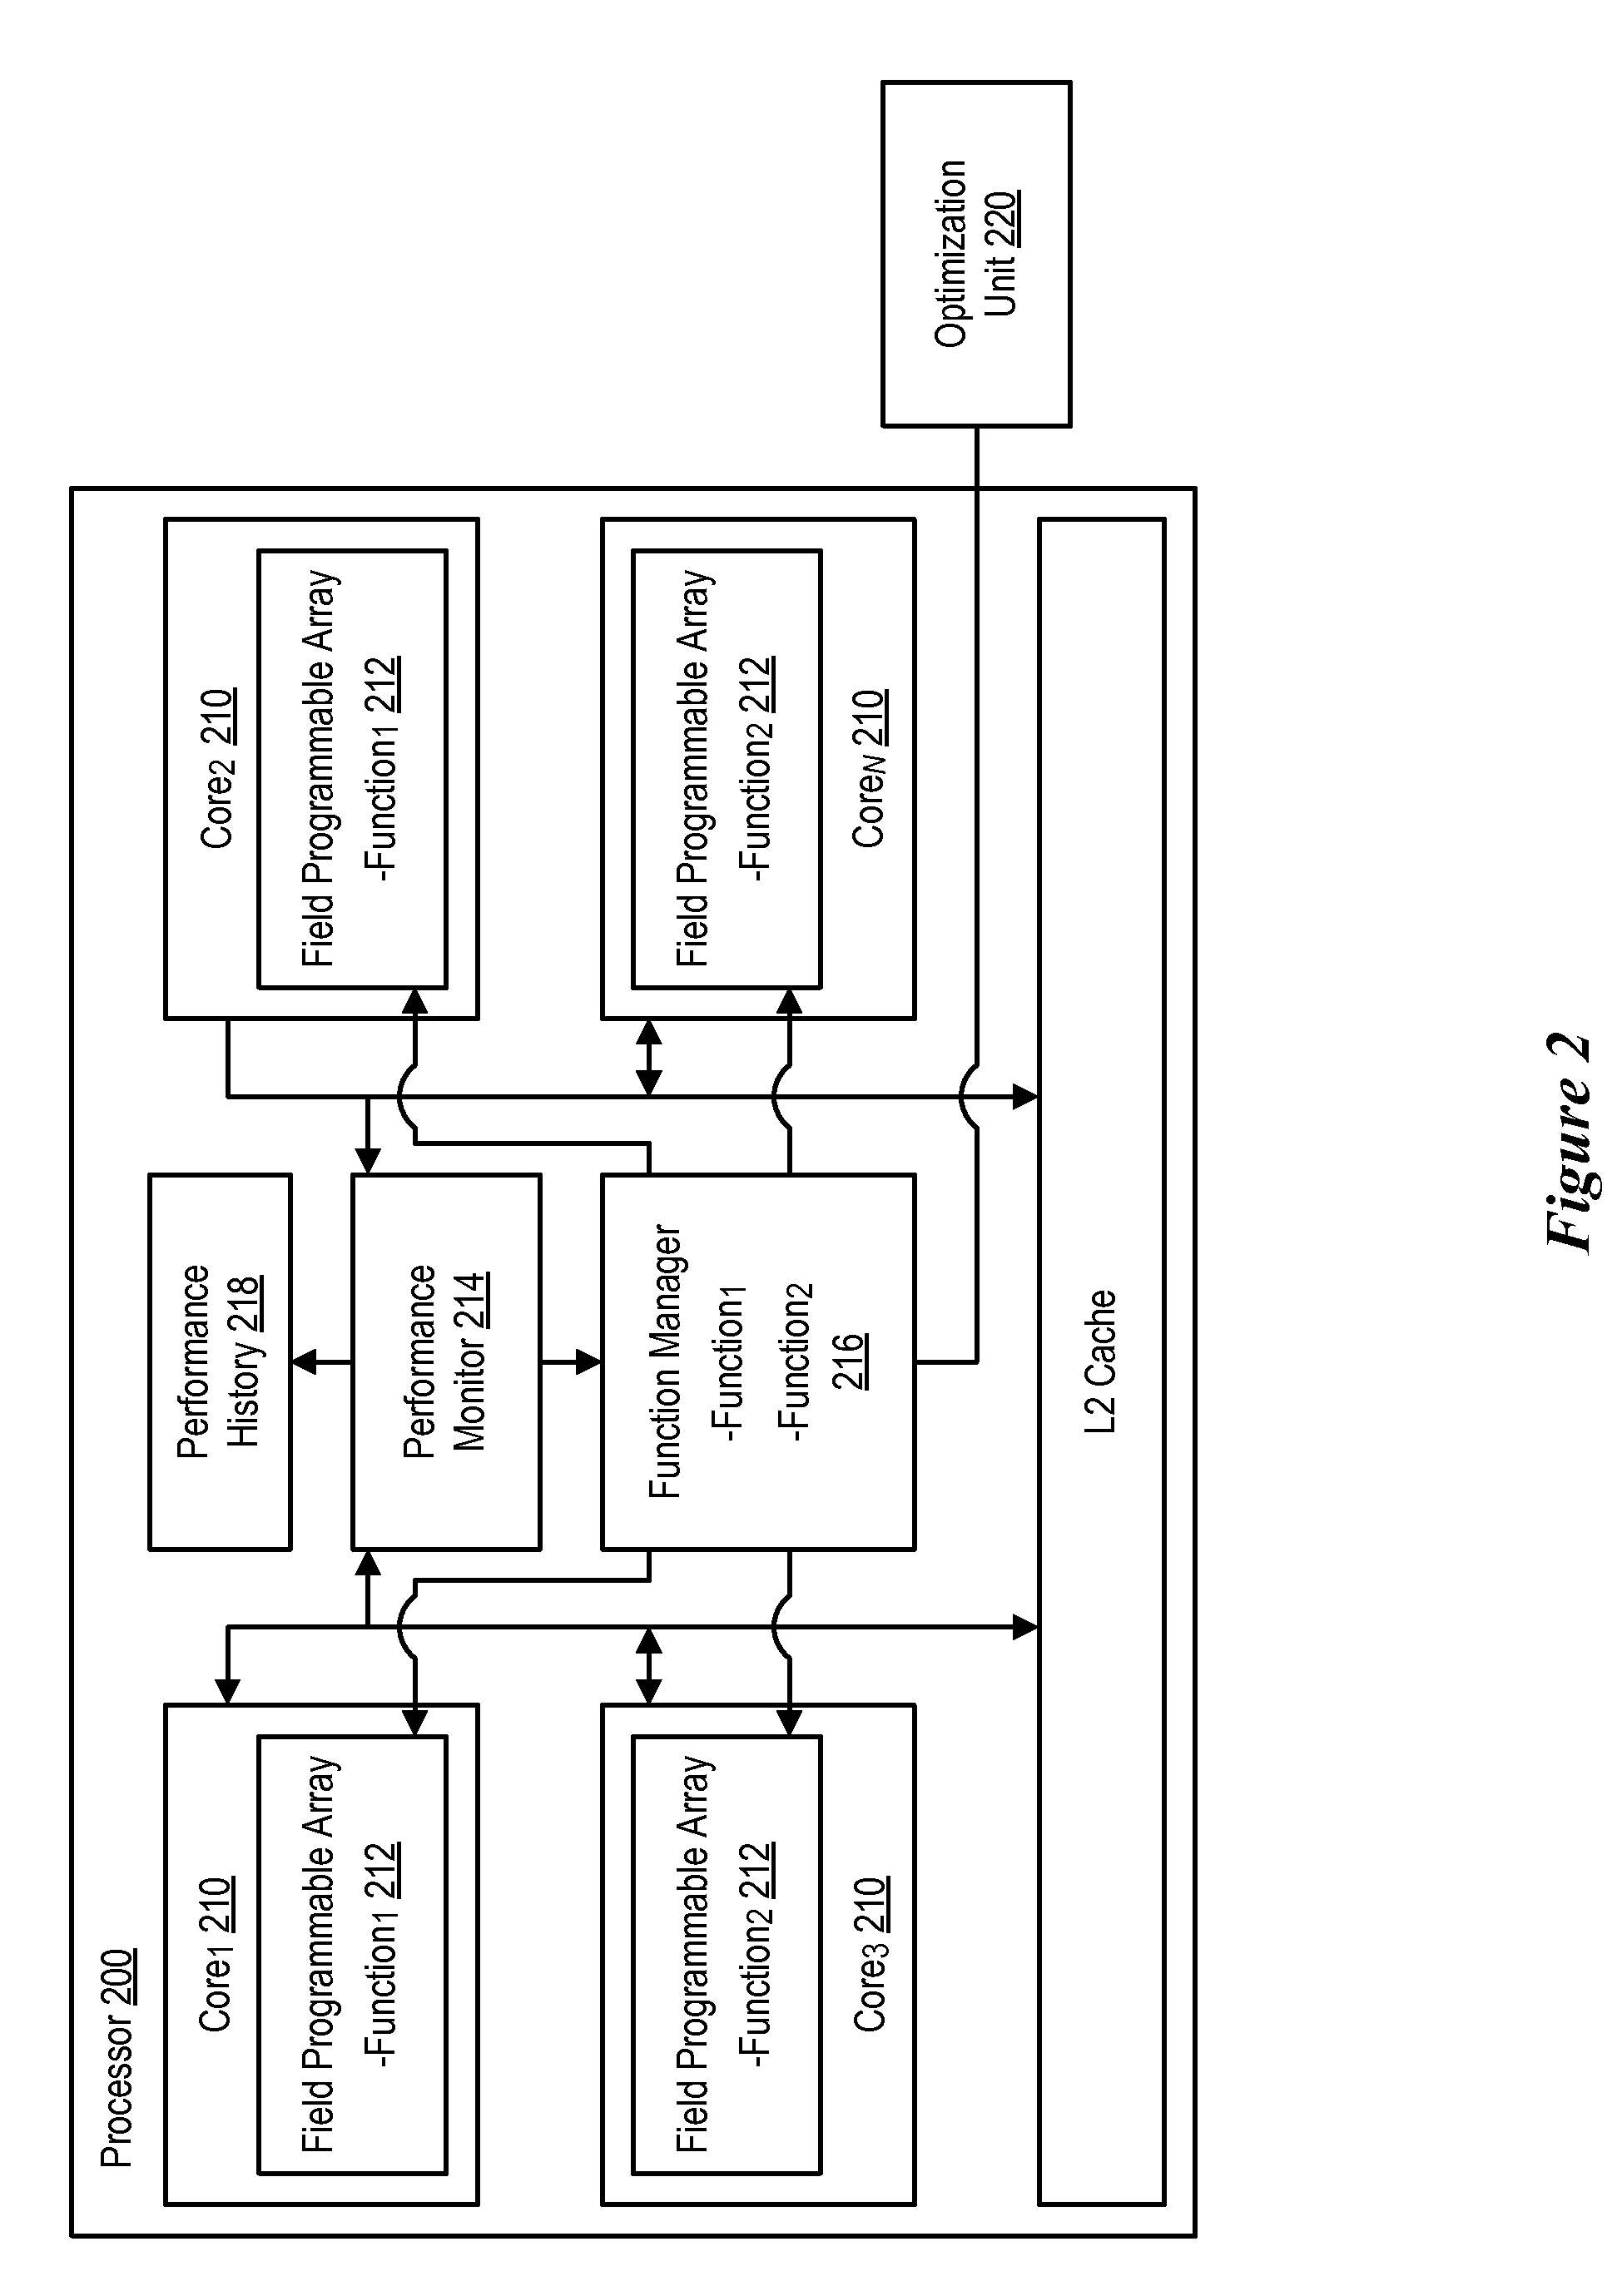 Multicore Processor and Method of Use That Adapts Core Functions Based on Workload Execution